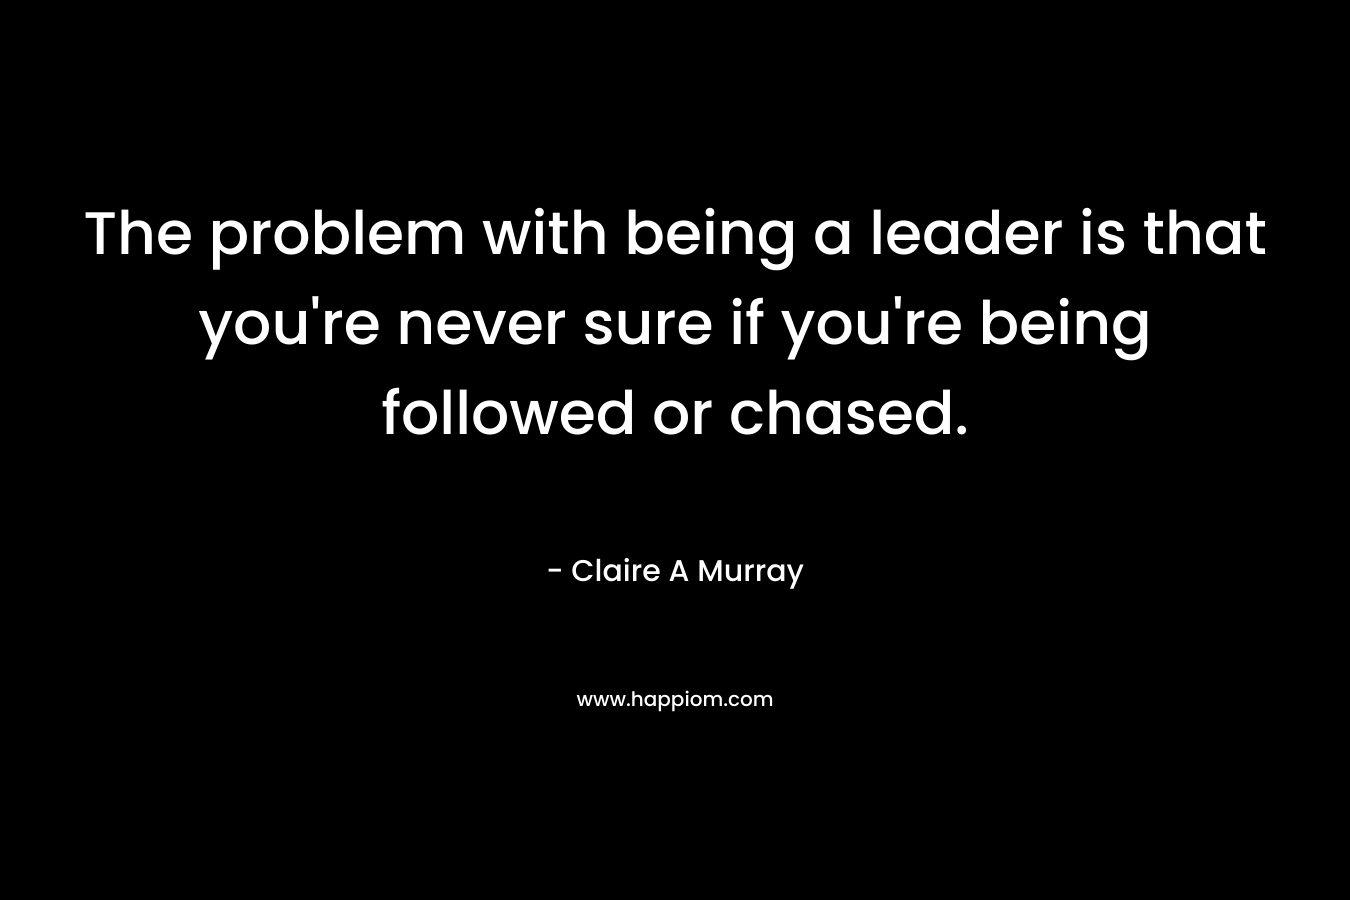 The problem with being a leader is that you're never sure if you're being followed or chased.